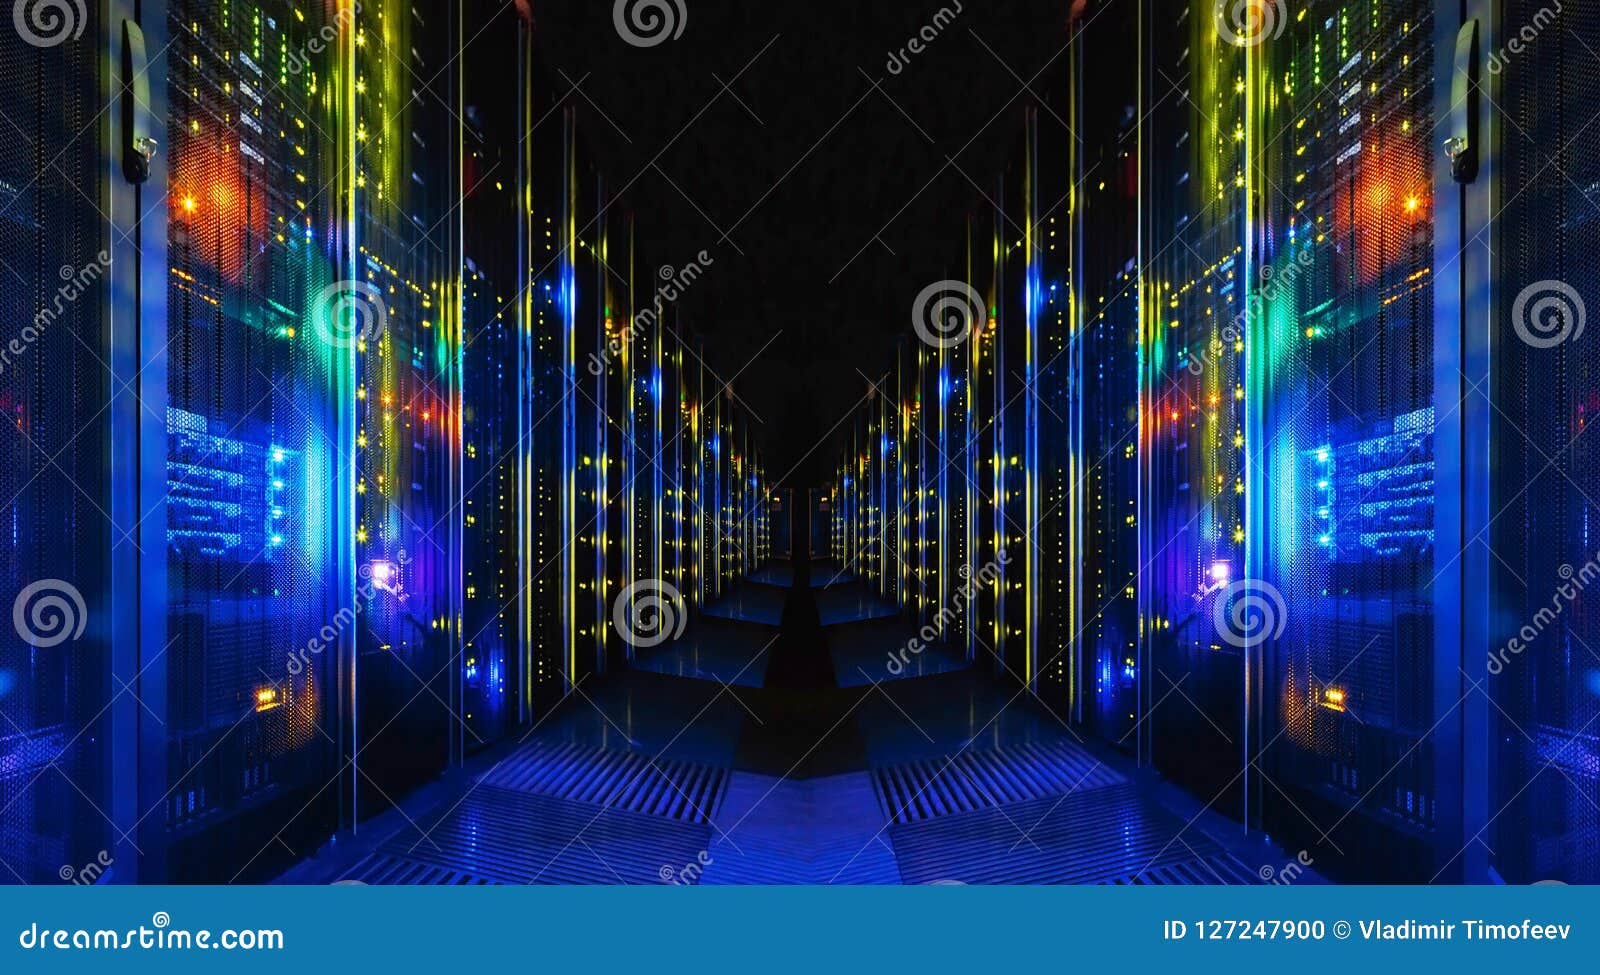 shot of corridor in large working data center full of rack servers and supercomputers.